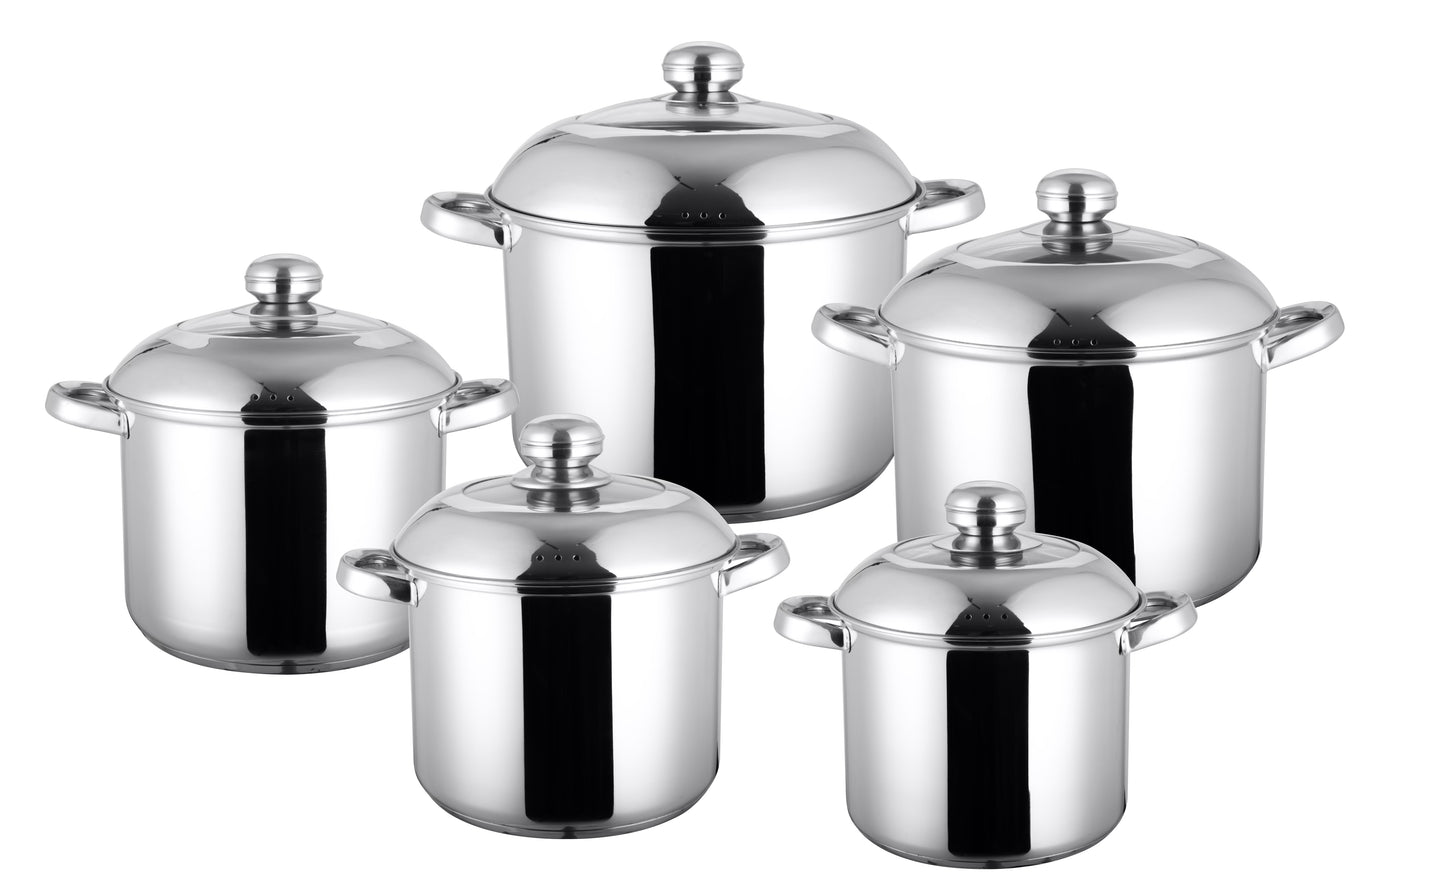 10 PC Stainless Steel Cookware Set